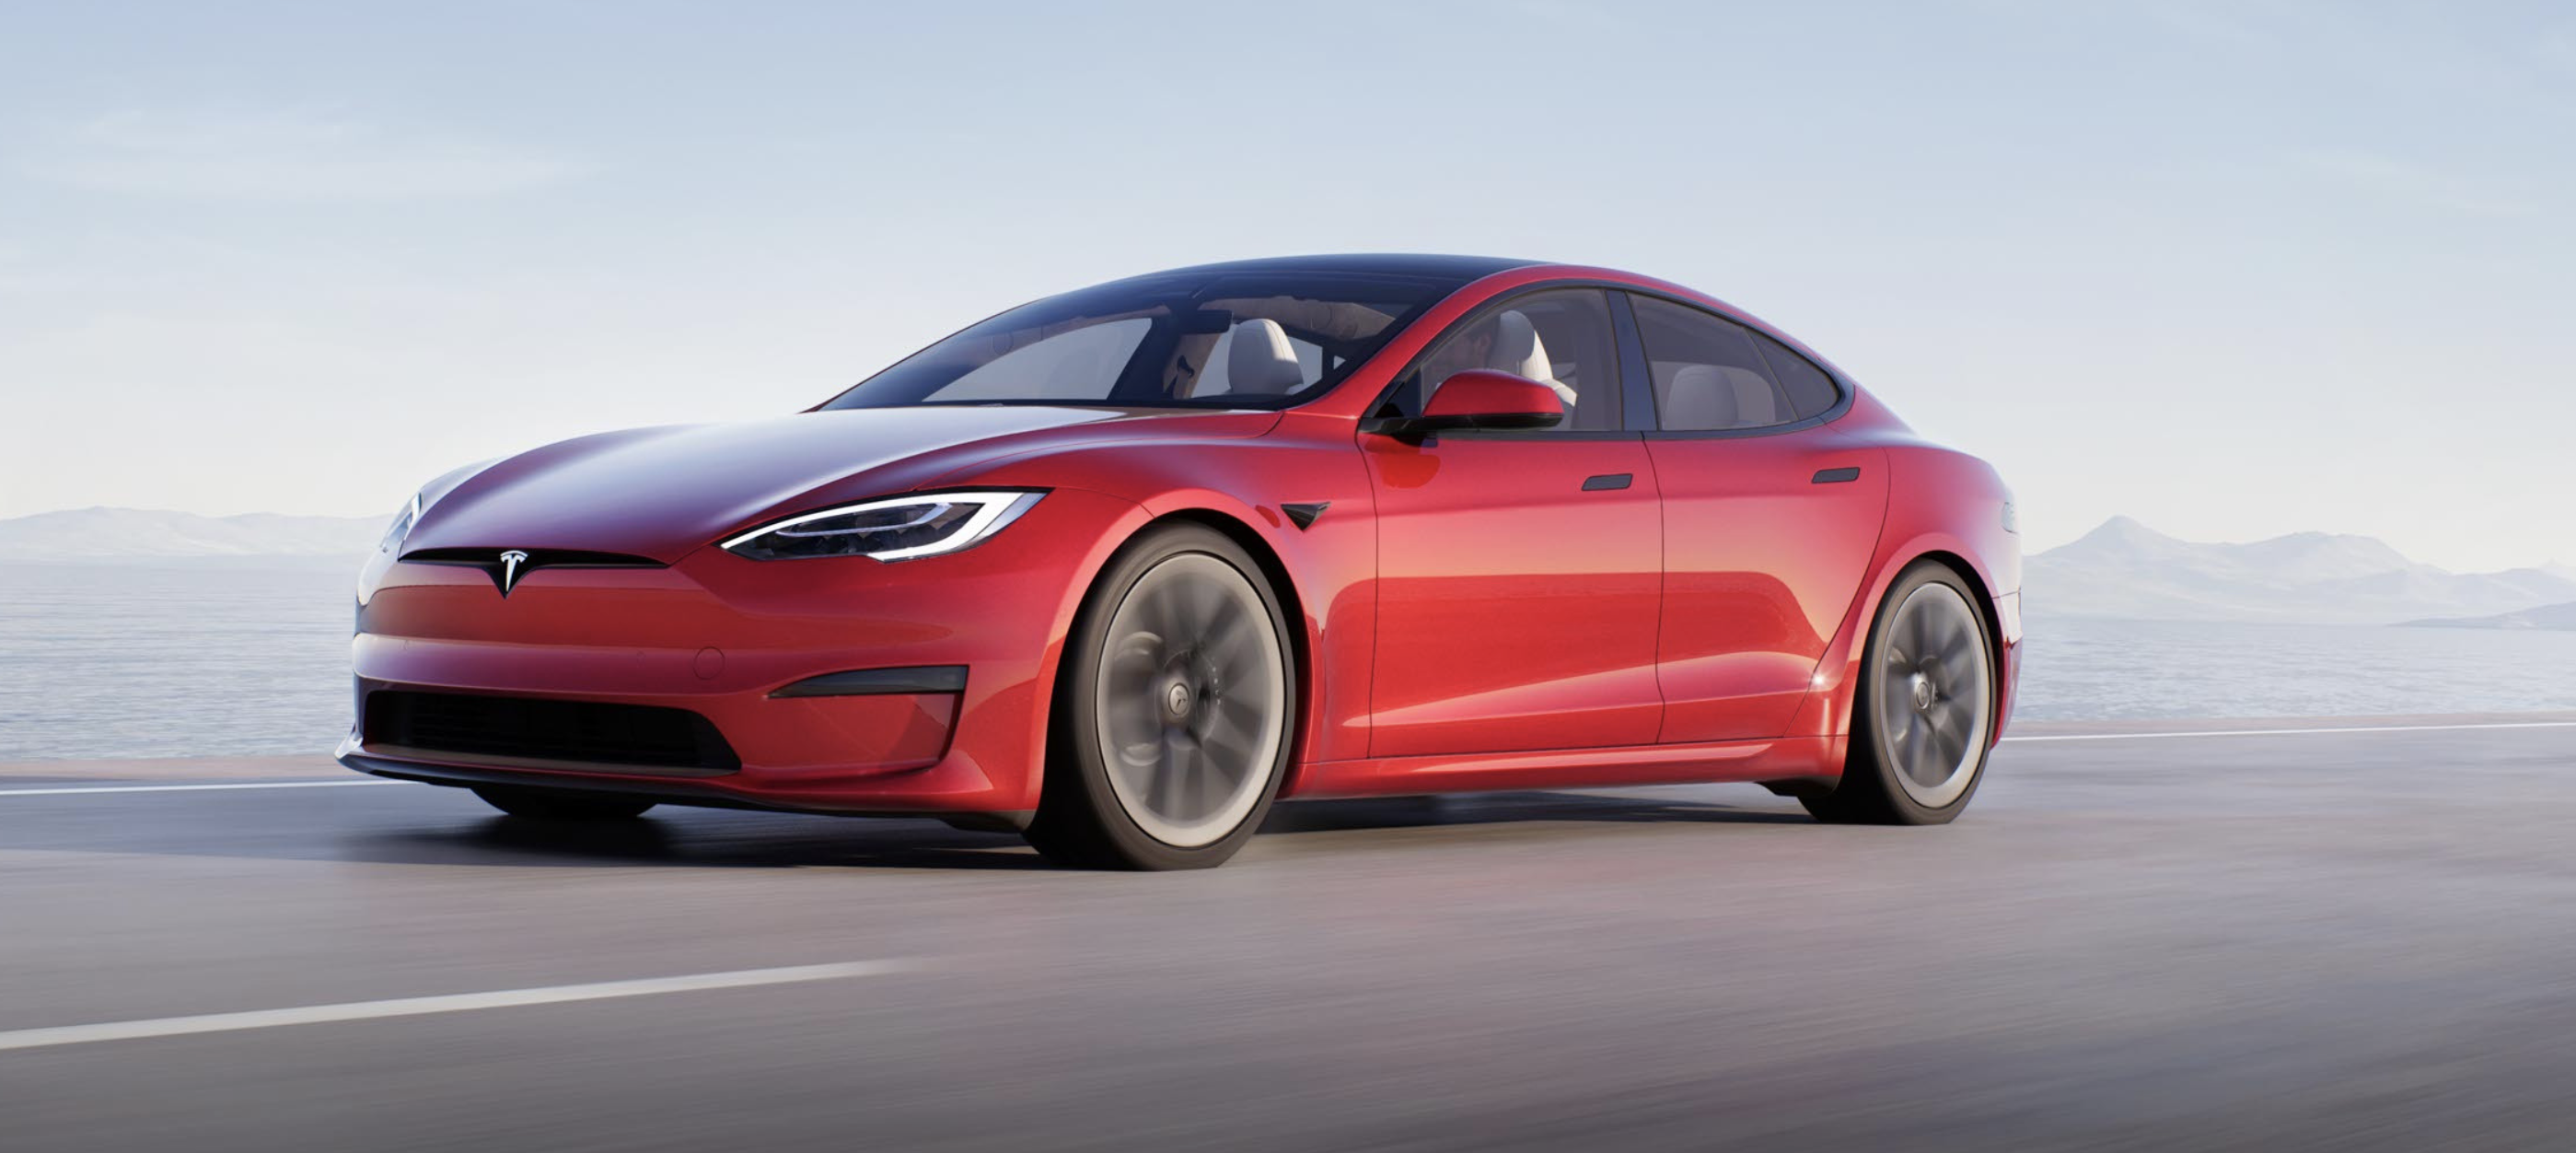 22 Tesla Model S Review Pricing And Specs